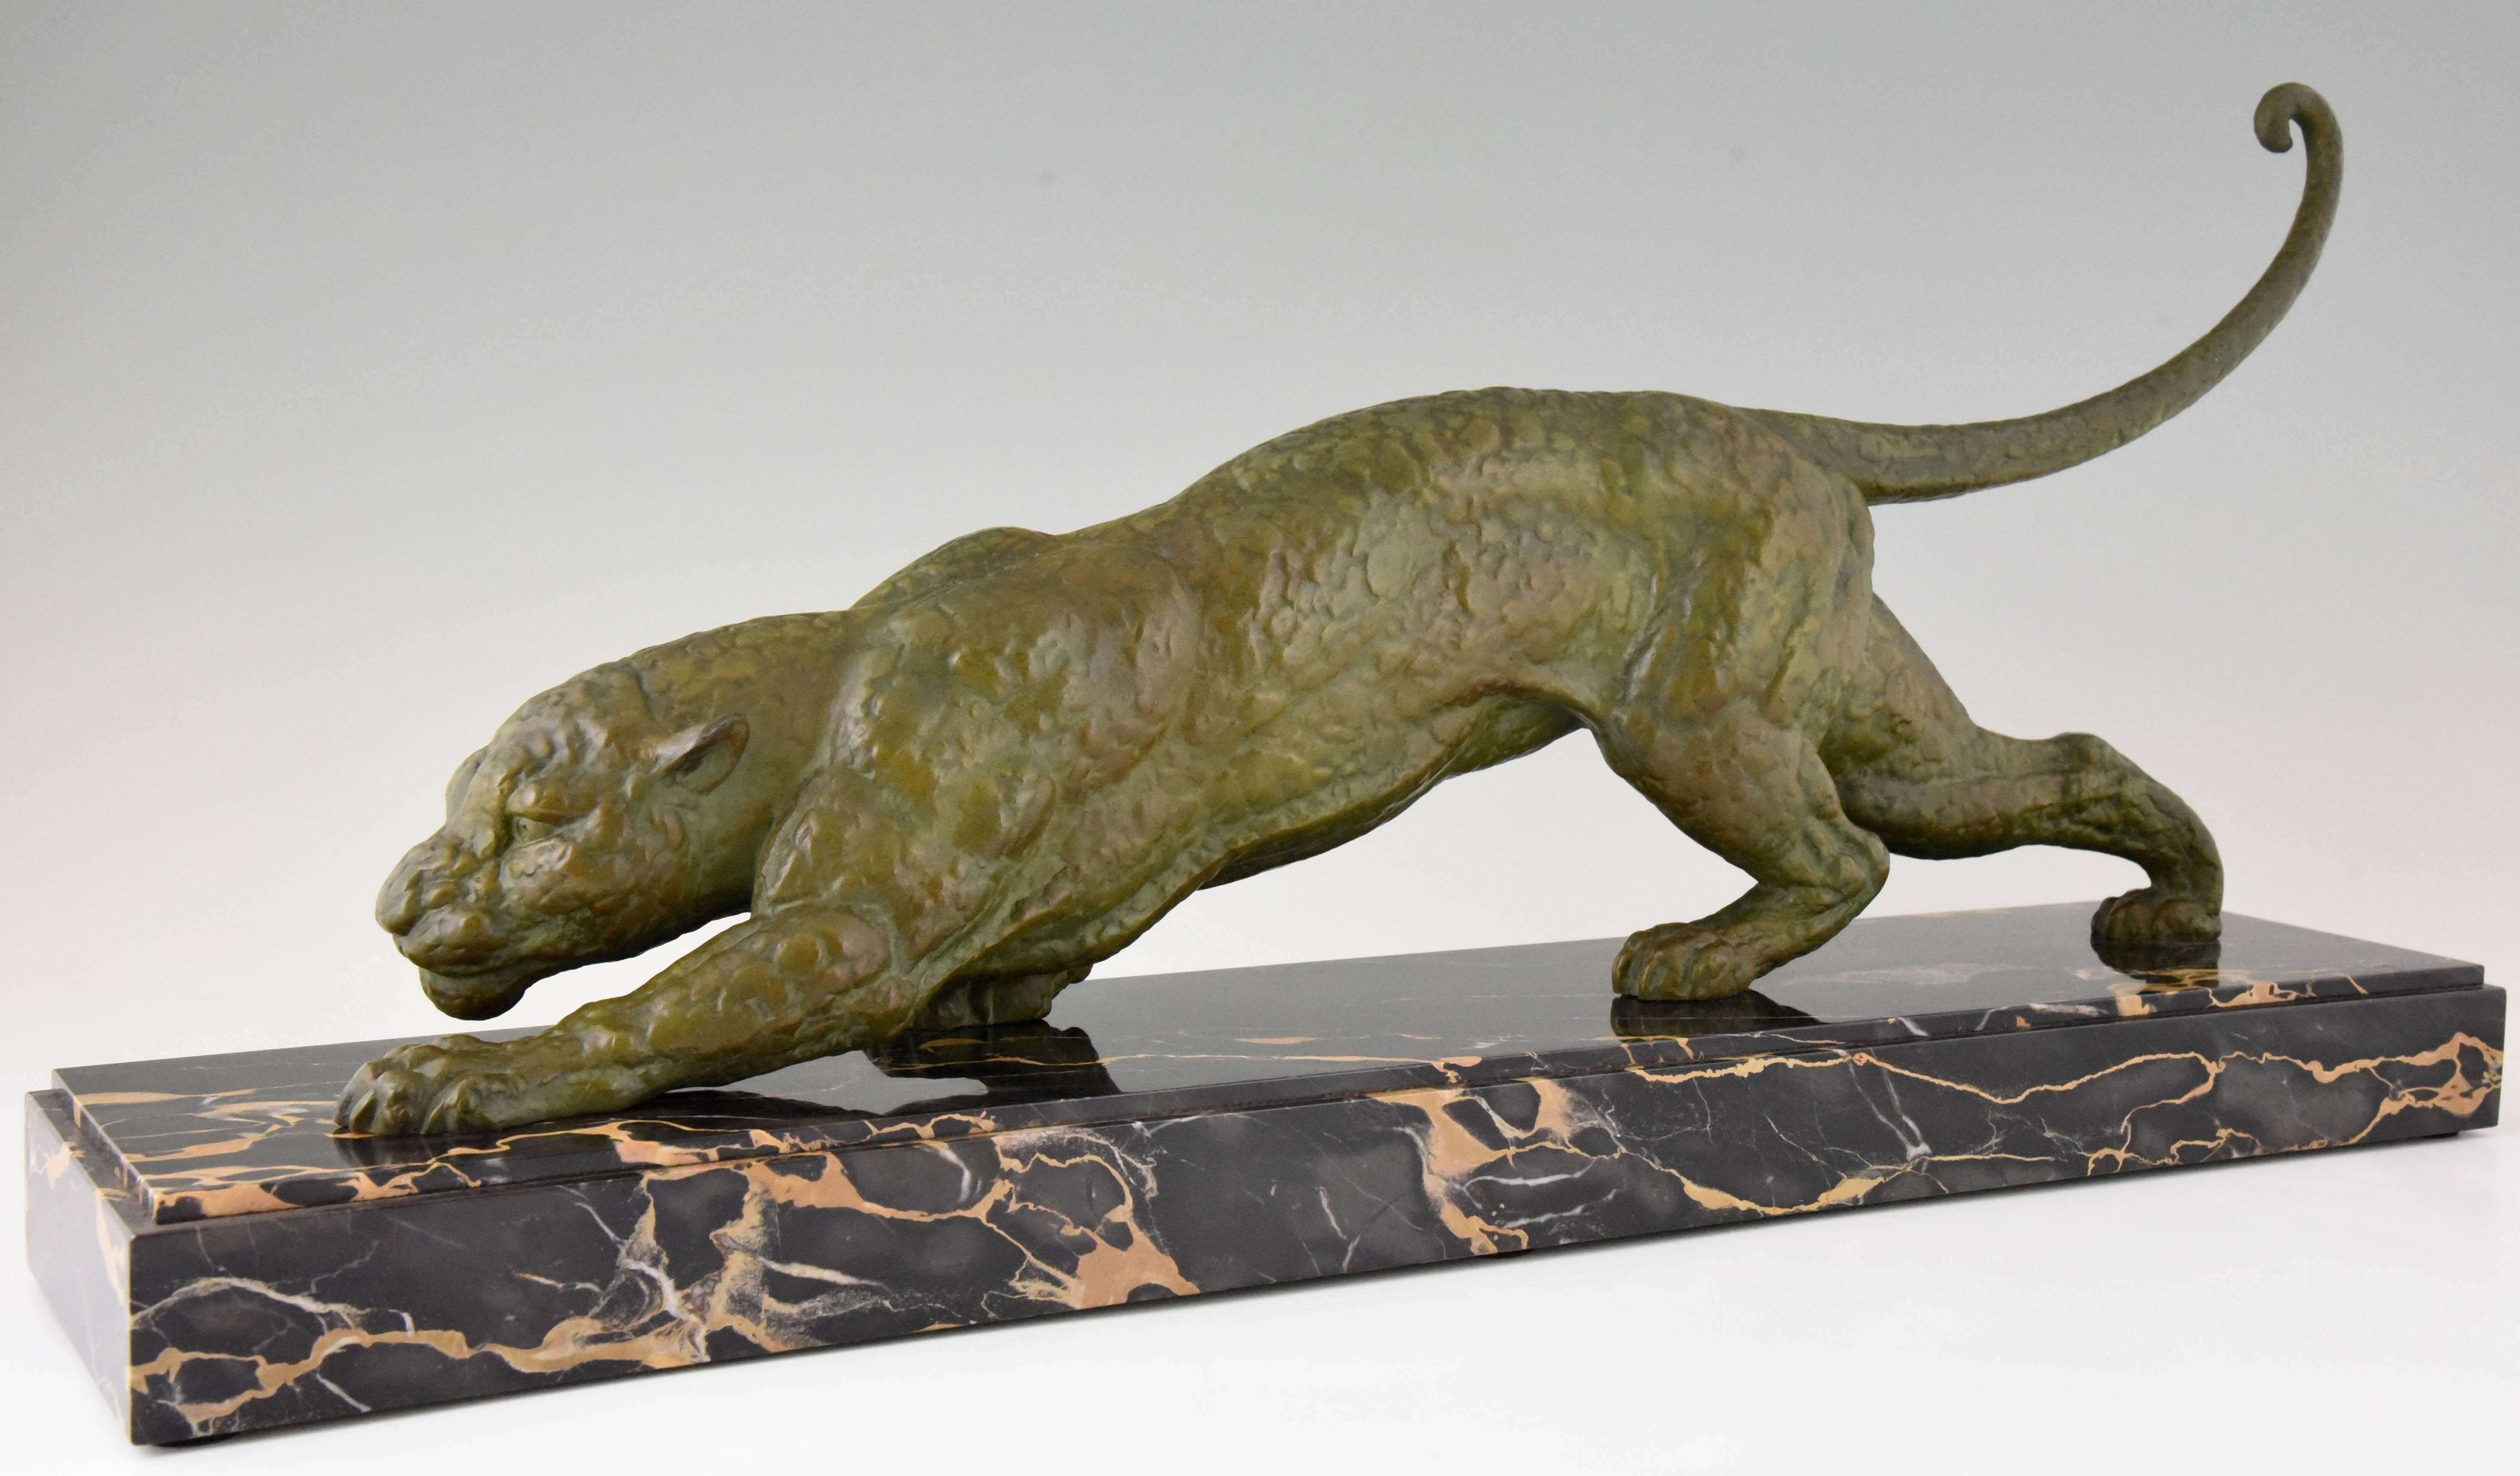 Elegant Art Deco sculpture of a panther by the famous Demetre Chiparus on a portor marble base. 
Signature/ Marks: D.H. Chiparus
Style: Art Deco
Date: 1930
Material: Green patinated art metal.?Portor marble base.
Origin: France
Size: H. 36 cm